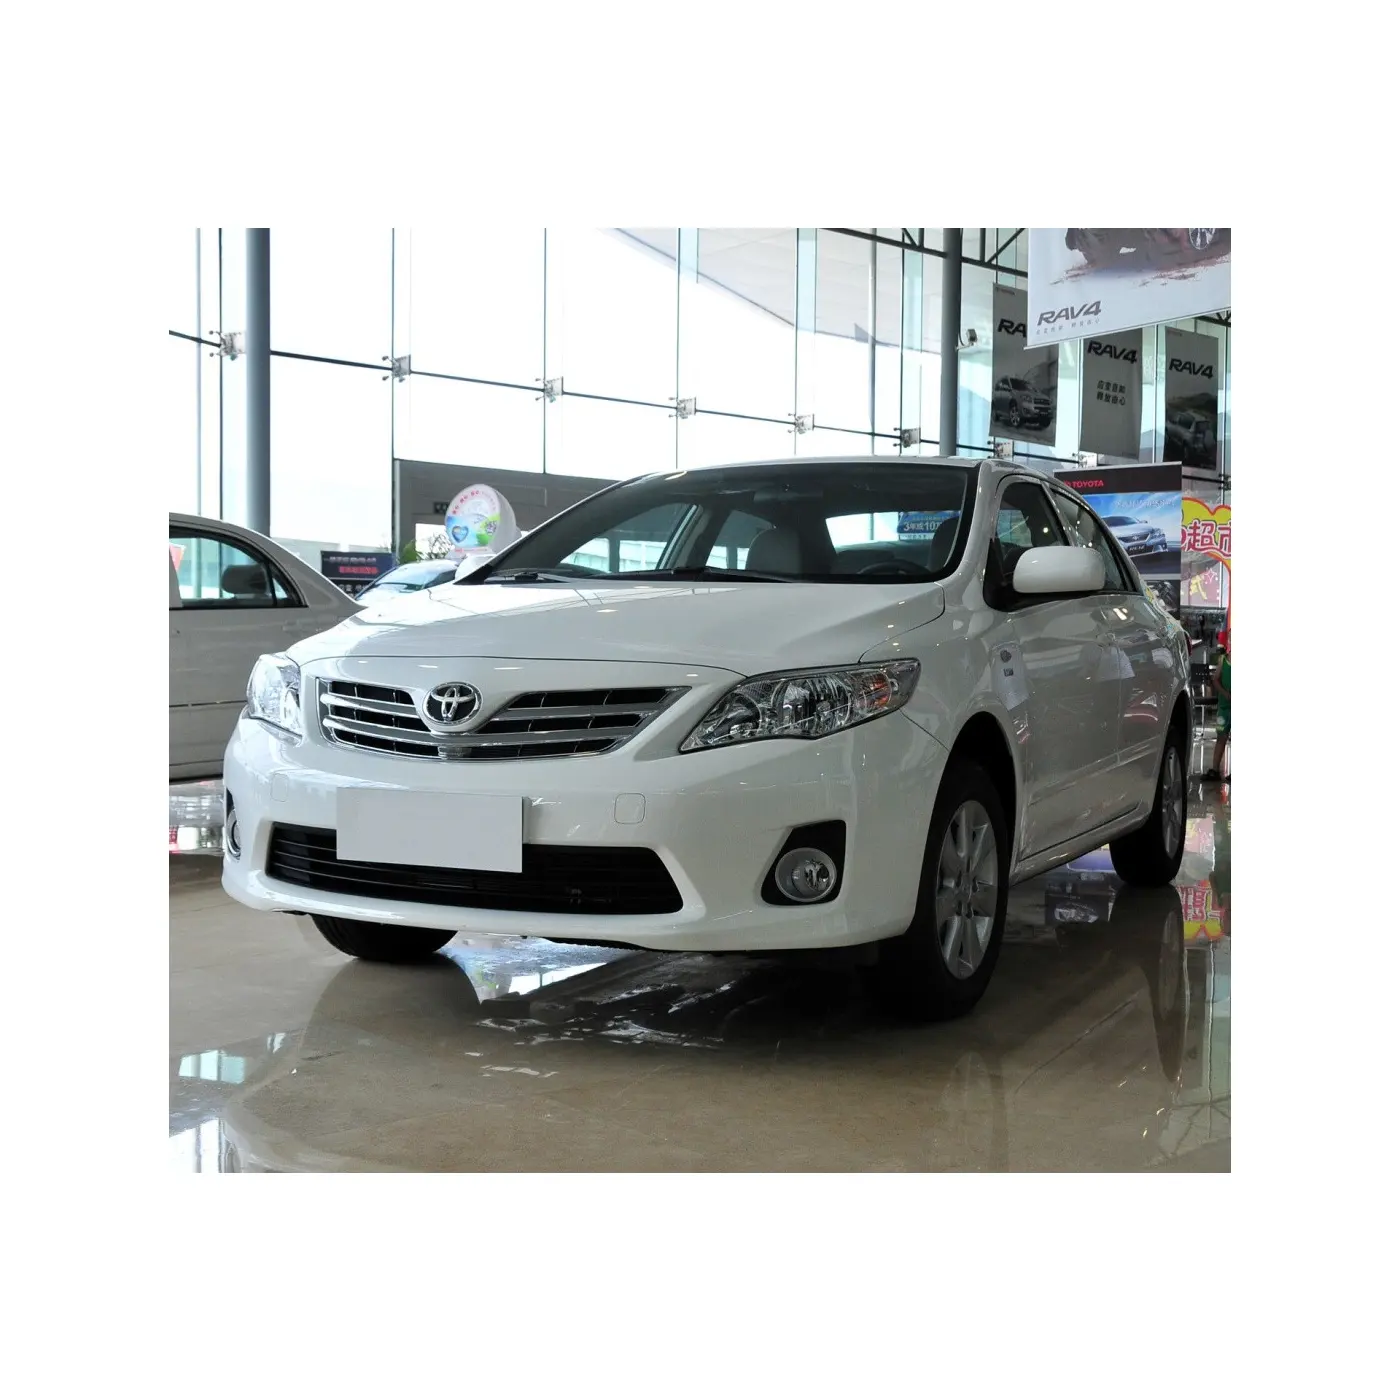 Used Car Toyota Corolla 2010 Year Model Gasoline Compact Car Steering Left Automatic Made In China For Sale Used Car Dealer 2